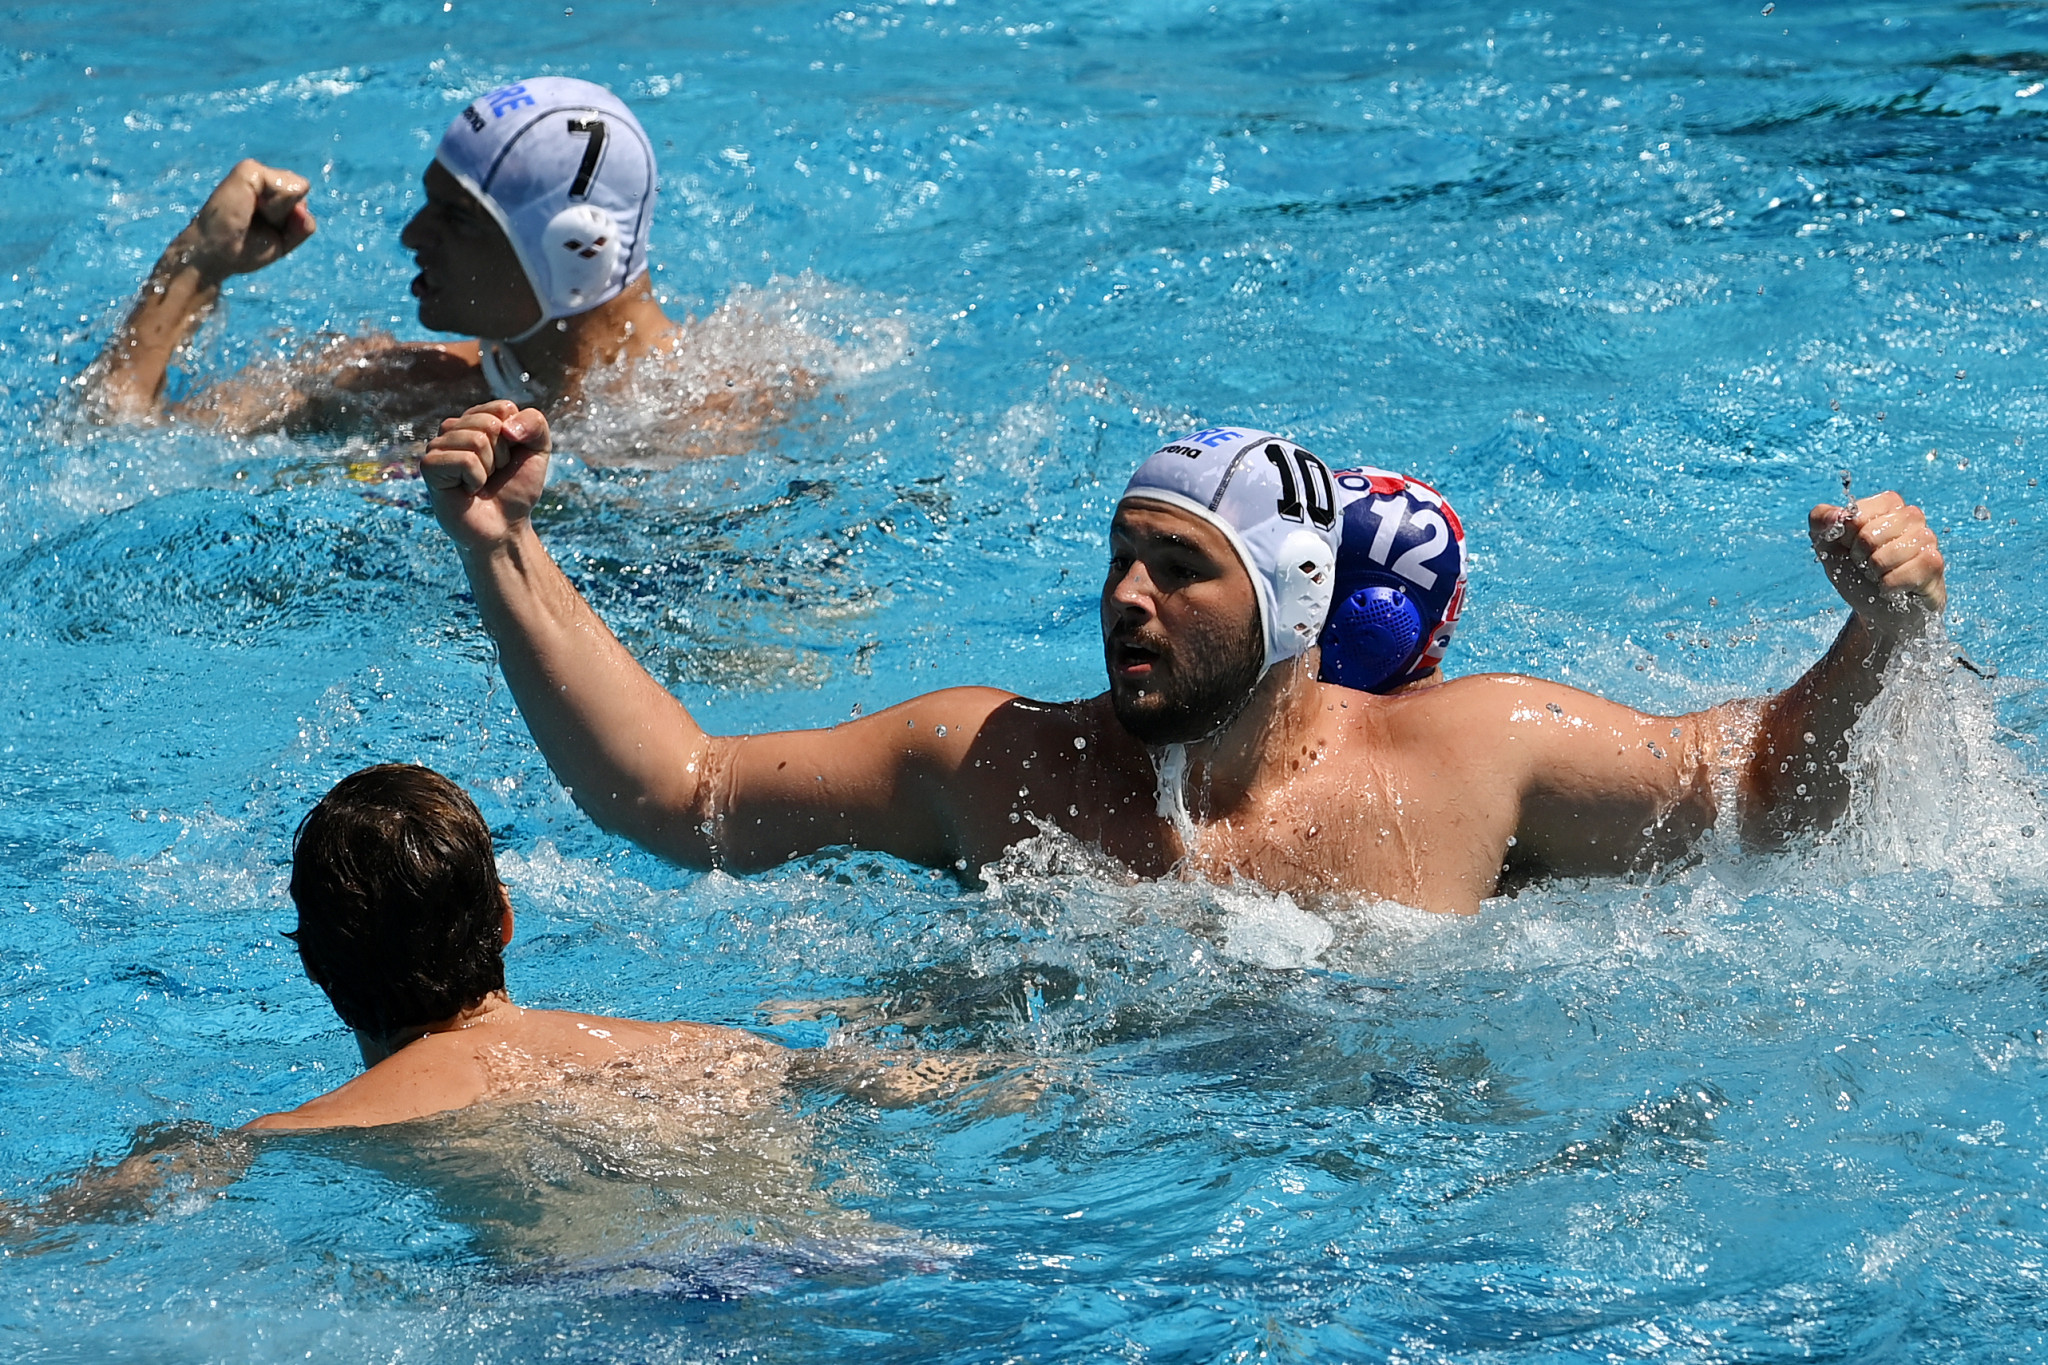 Konstantinos Kakaris, second right, scored three times for Greece to ensure they won the bronze medal match 9-7 against Croatia ©Getty Images